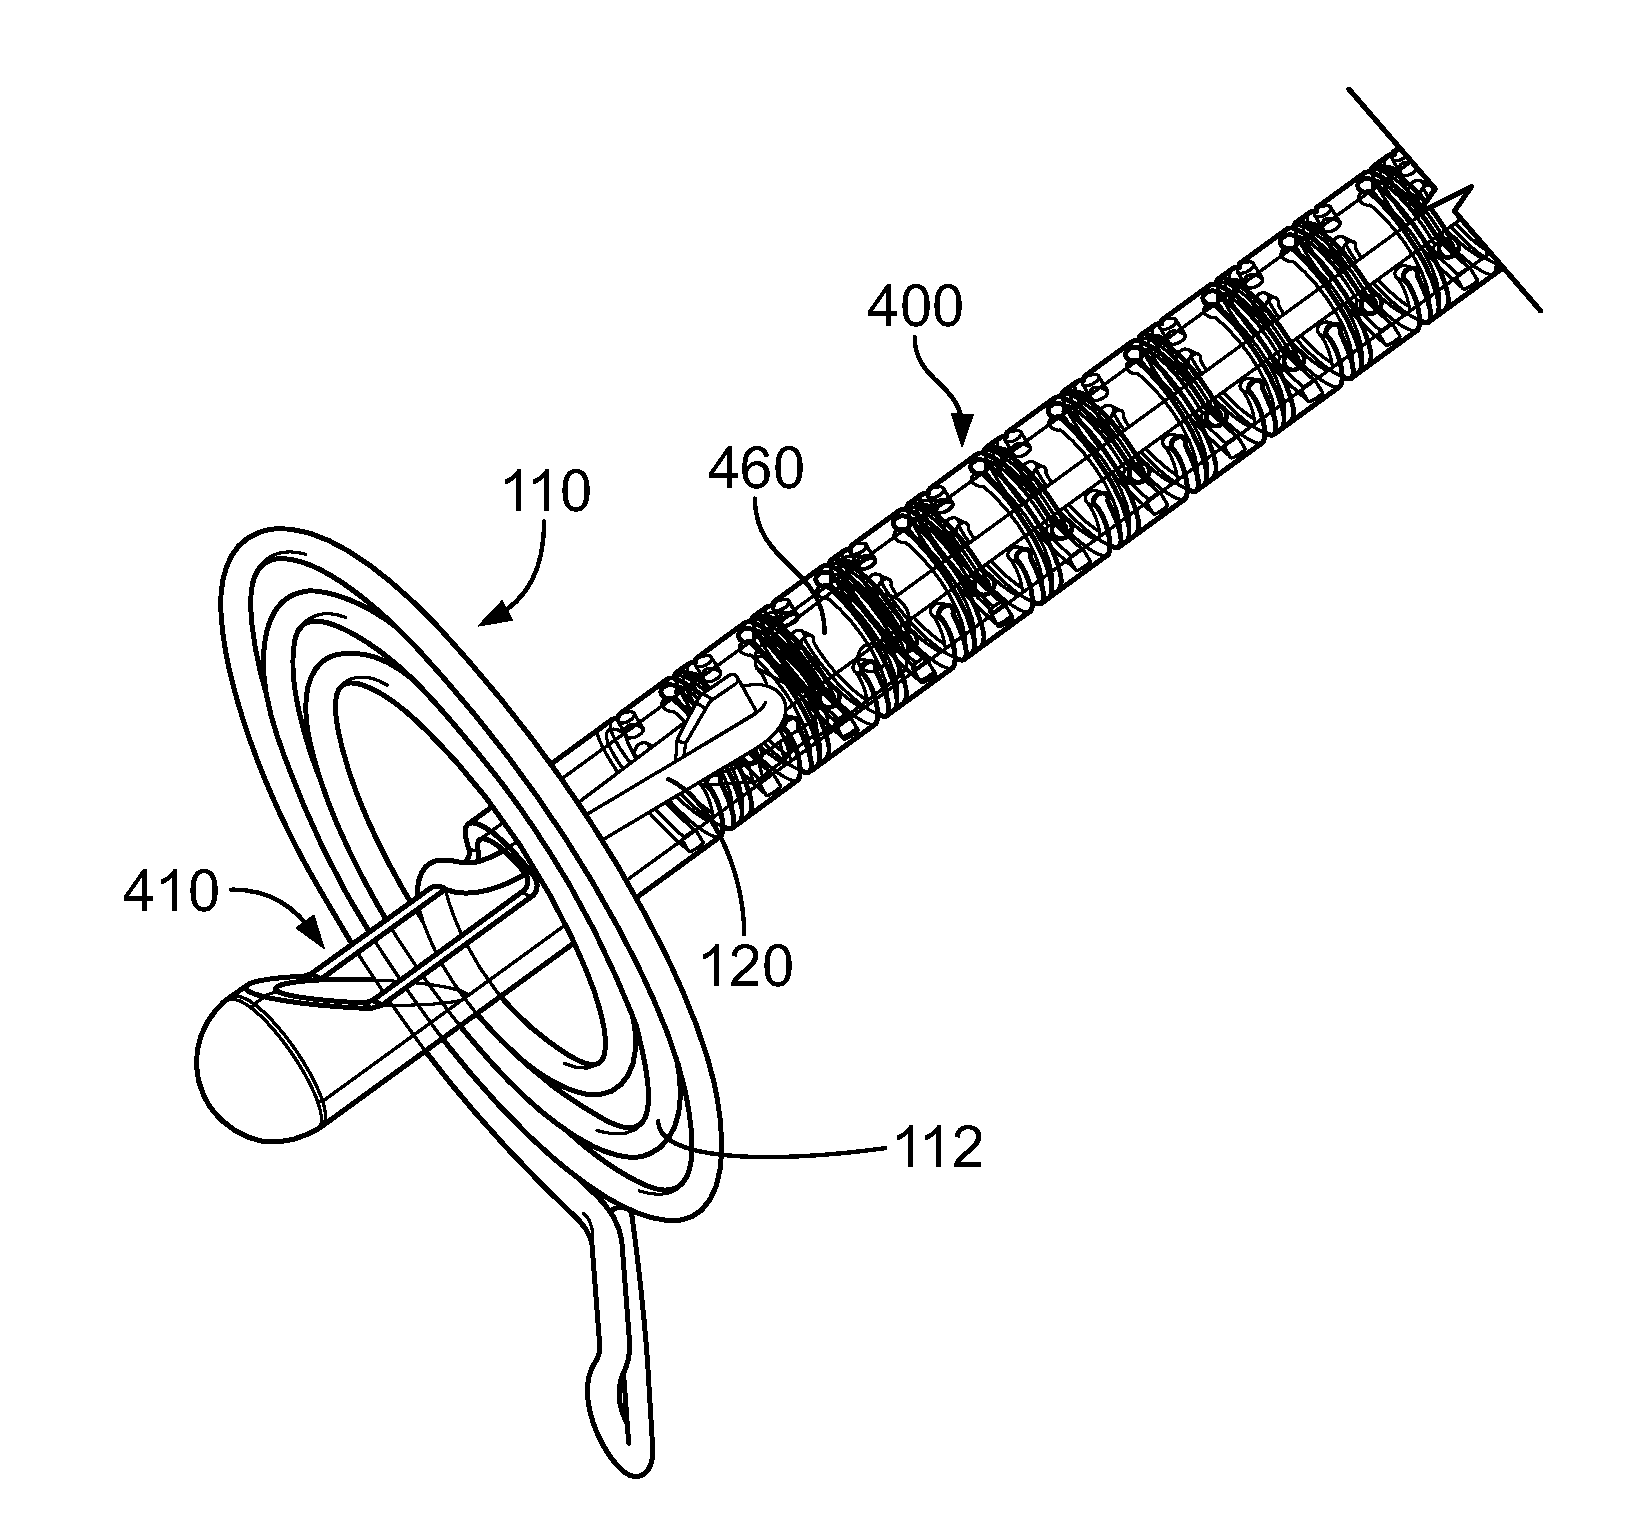 Heart valve repair devices for placement in ventricle and delivery systems for implanting heart valve repair devices